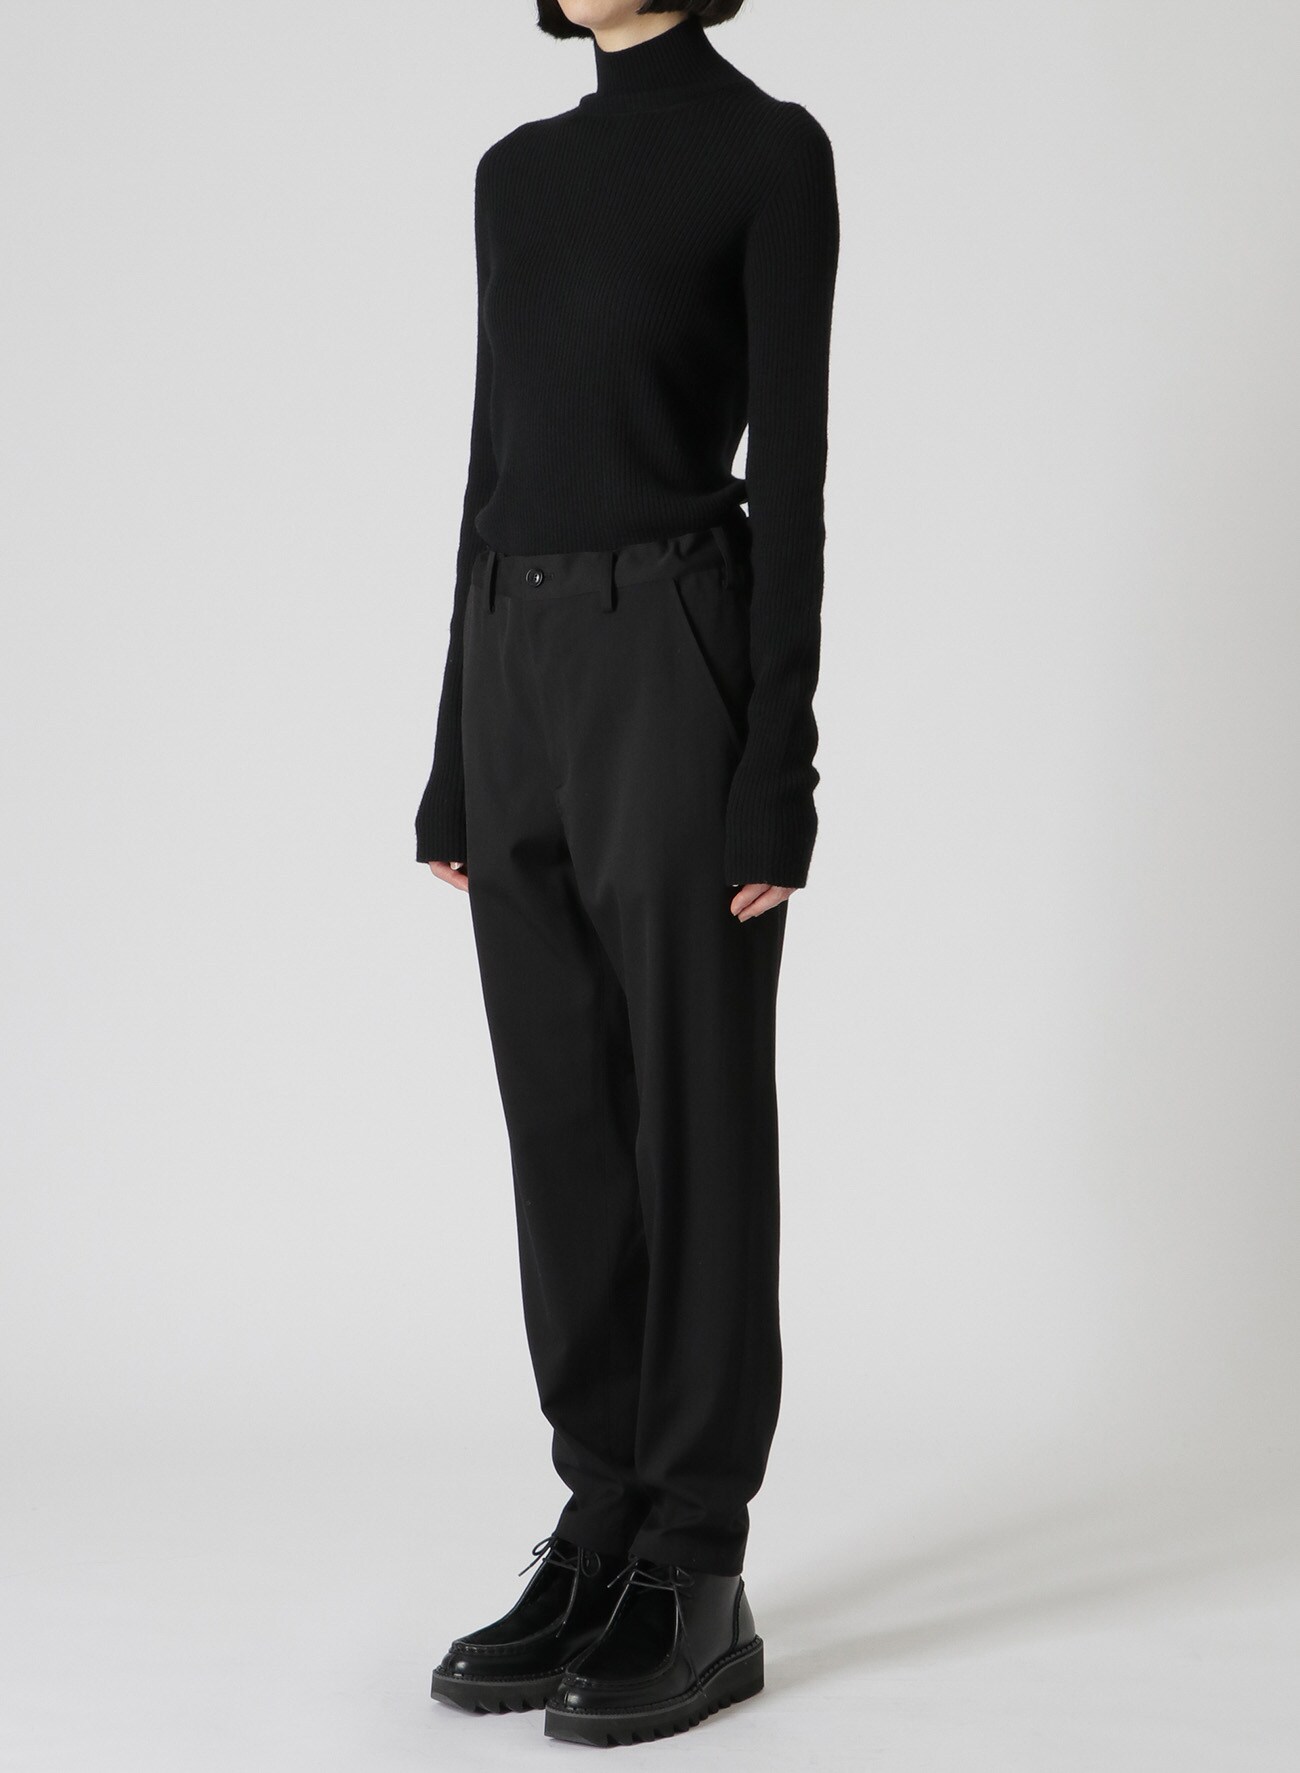 WRINKLED WOOL/RAYON TWILL SLIM FIT PANTS(XS Black): Y's｜THE SHOP